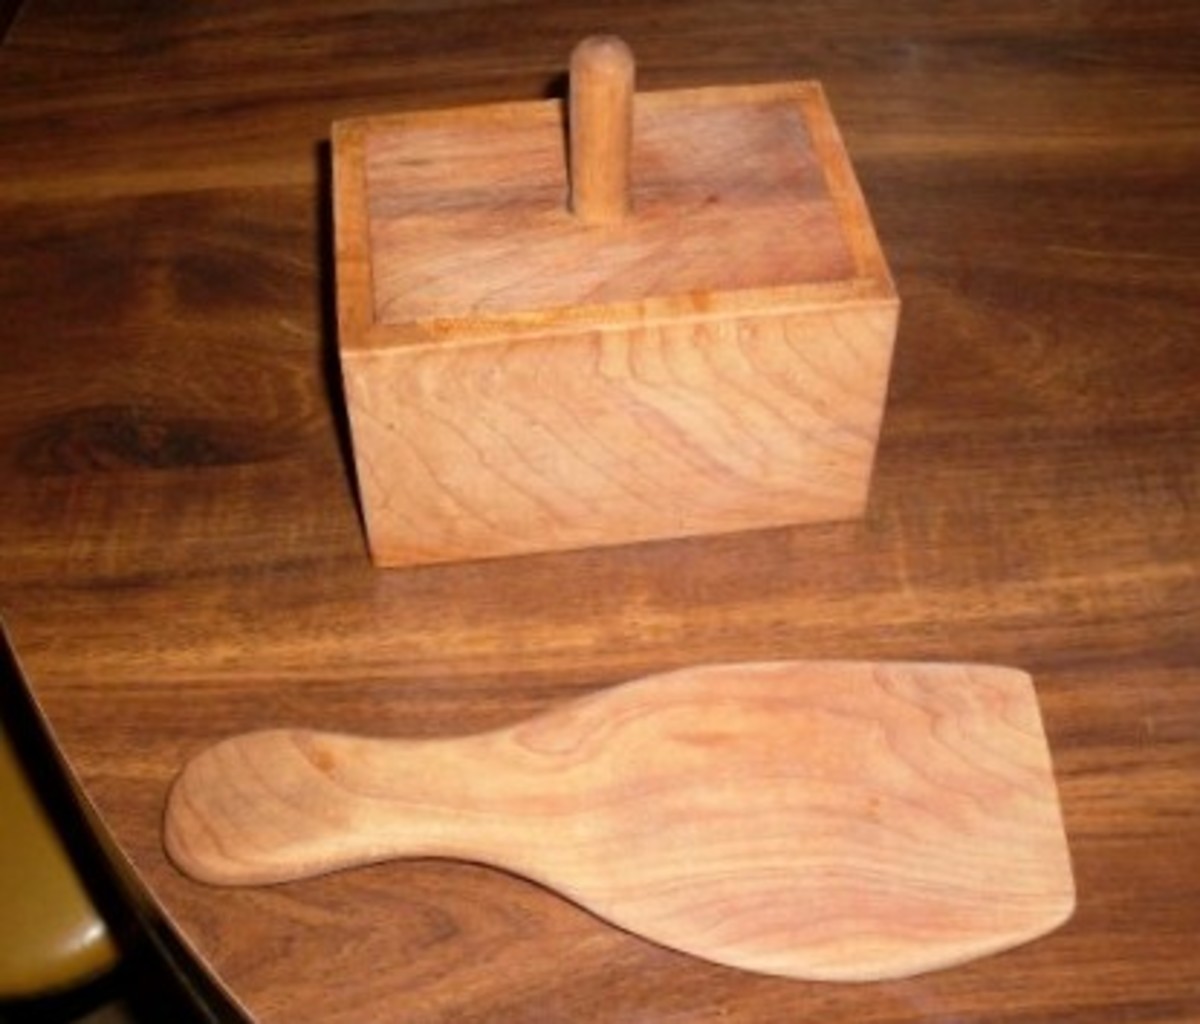 A one-pound butter mold that my father made, and a butter paddle, which is also his work.